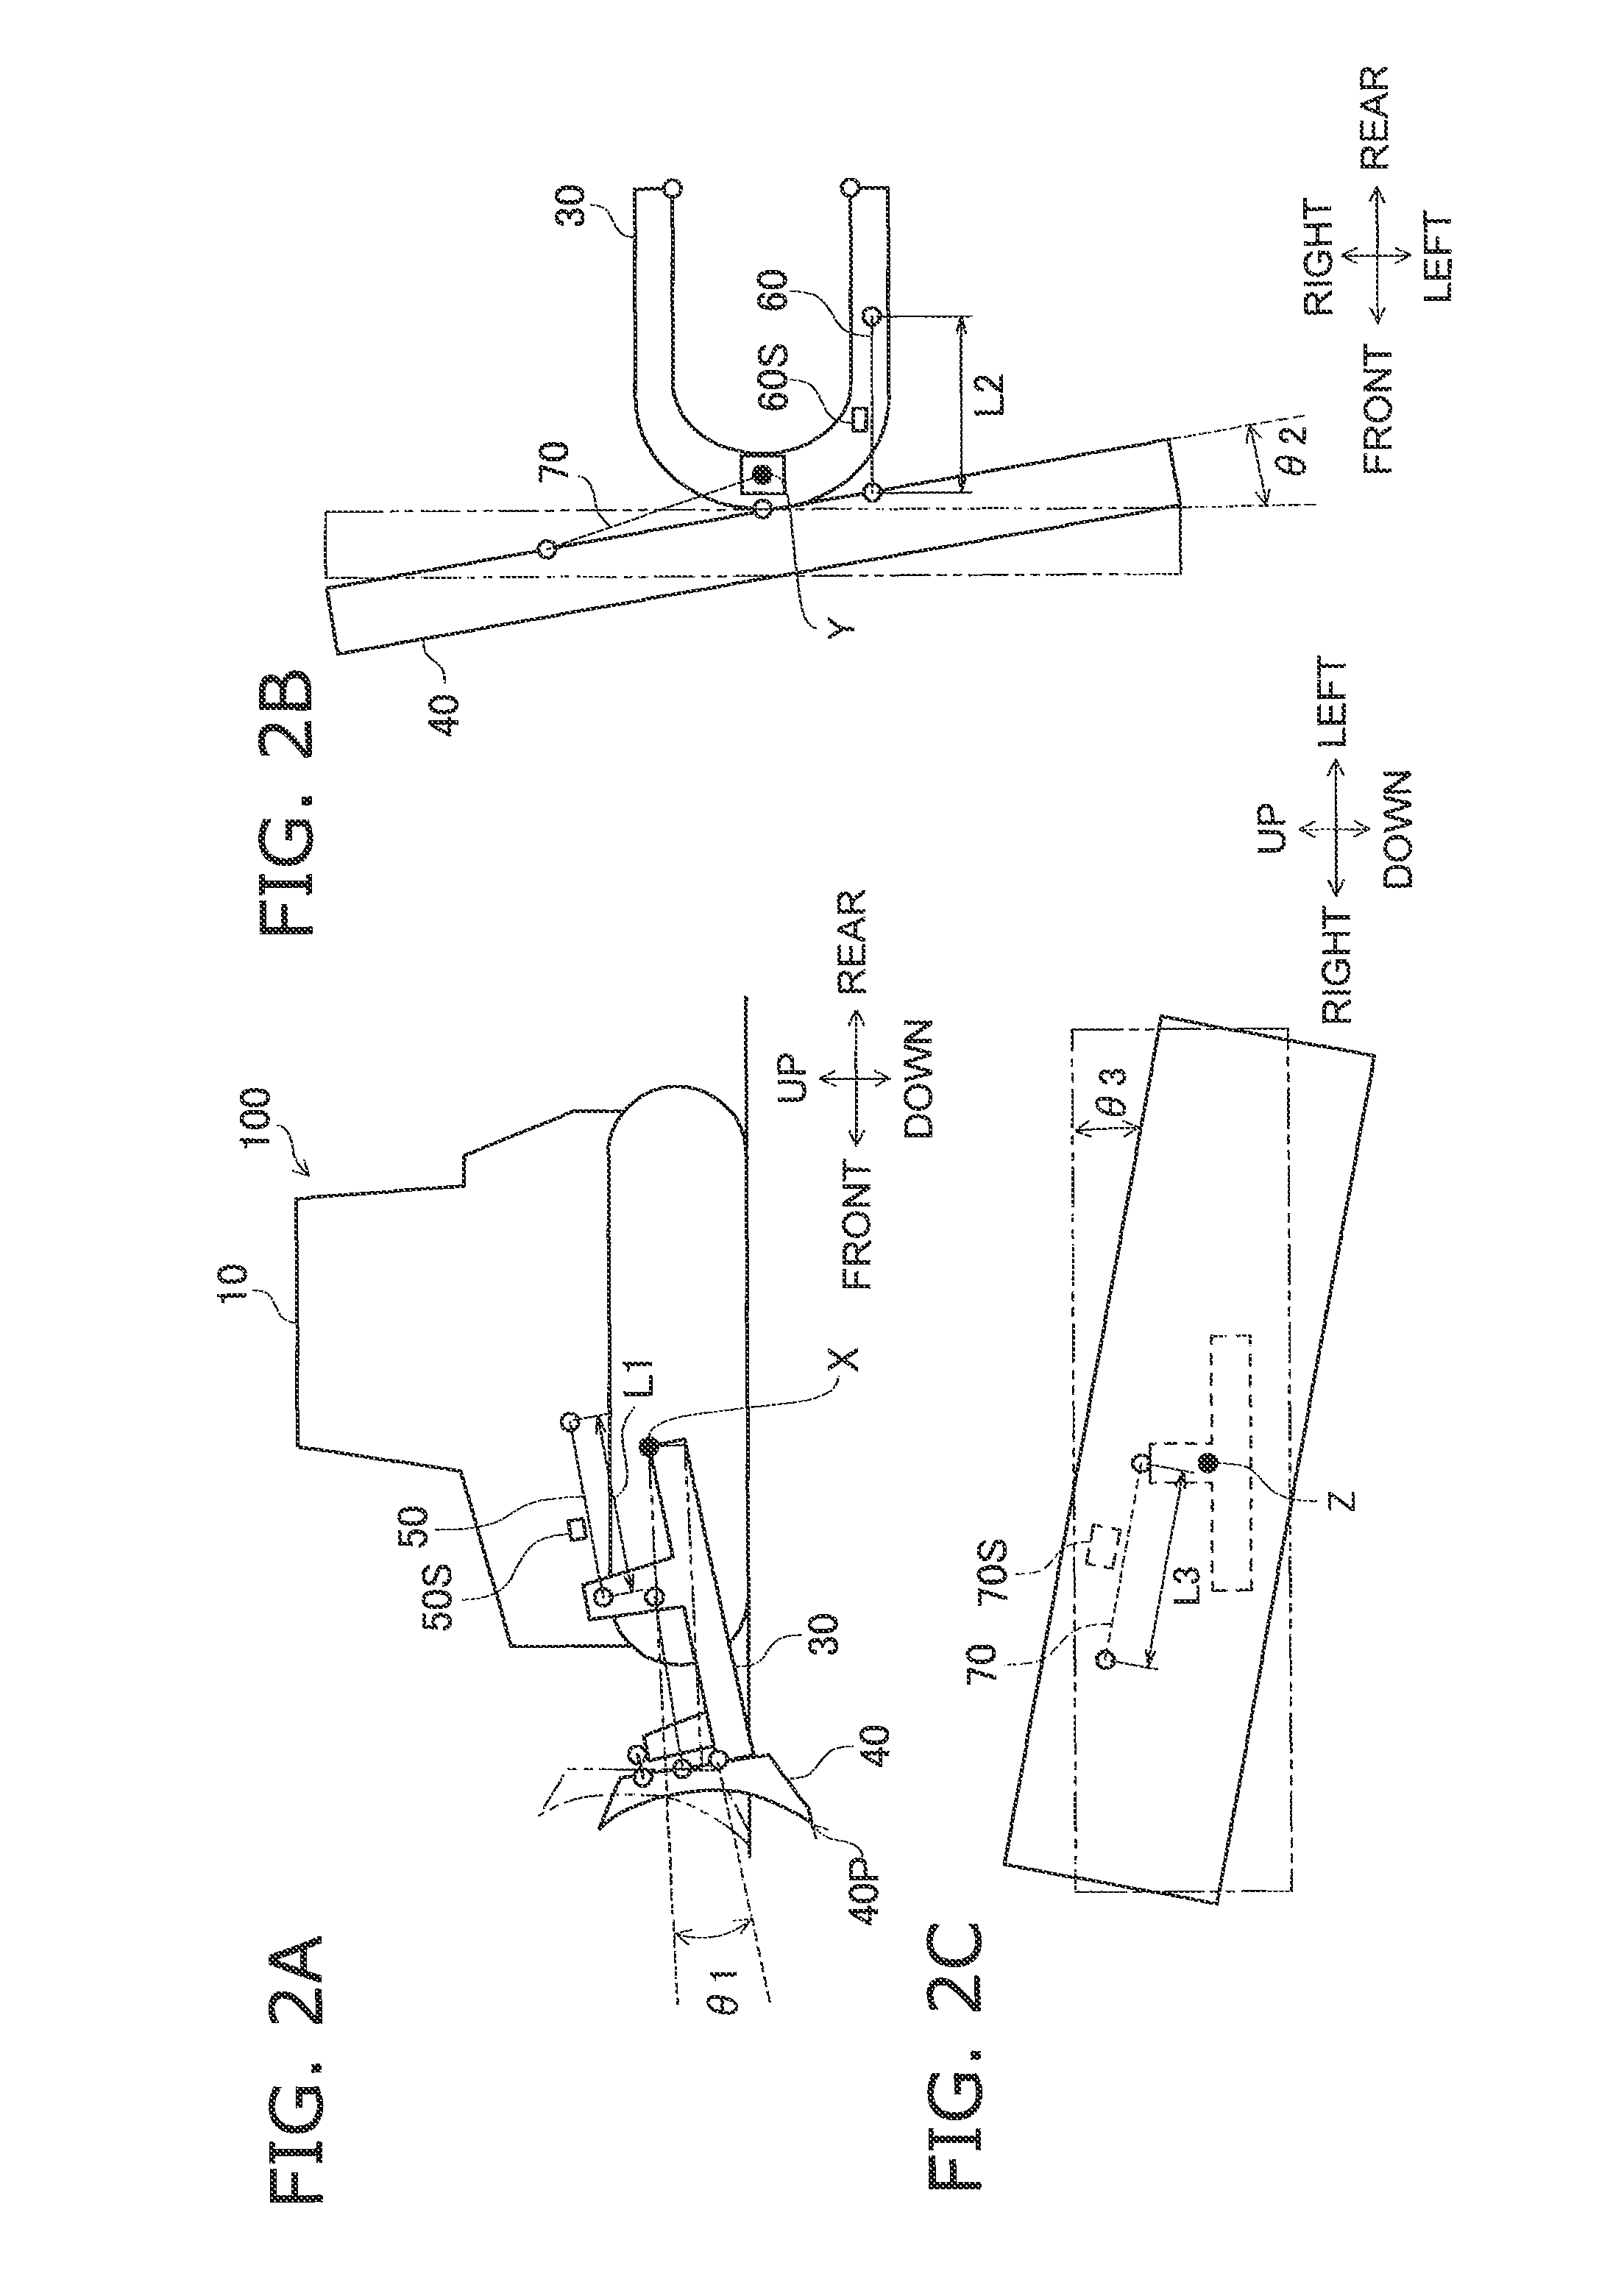 Blade control system and construction machine